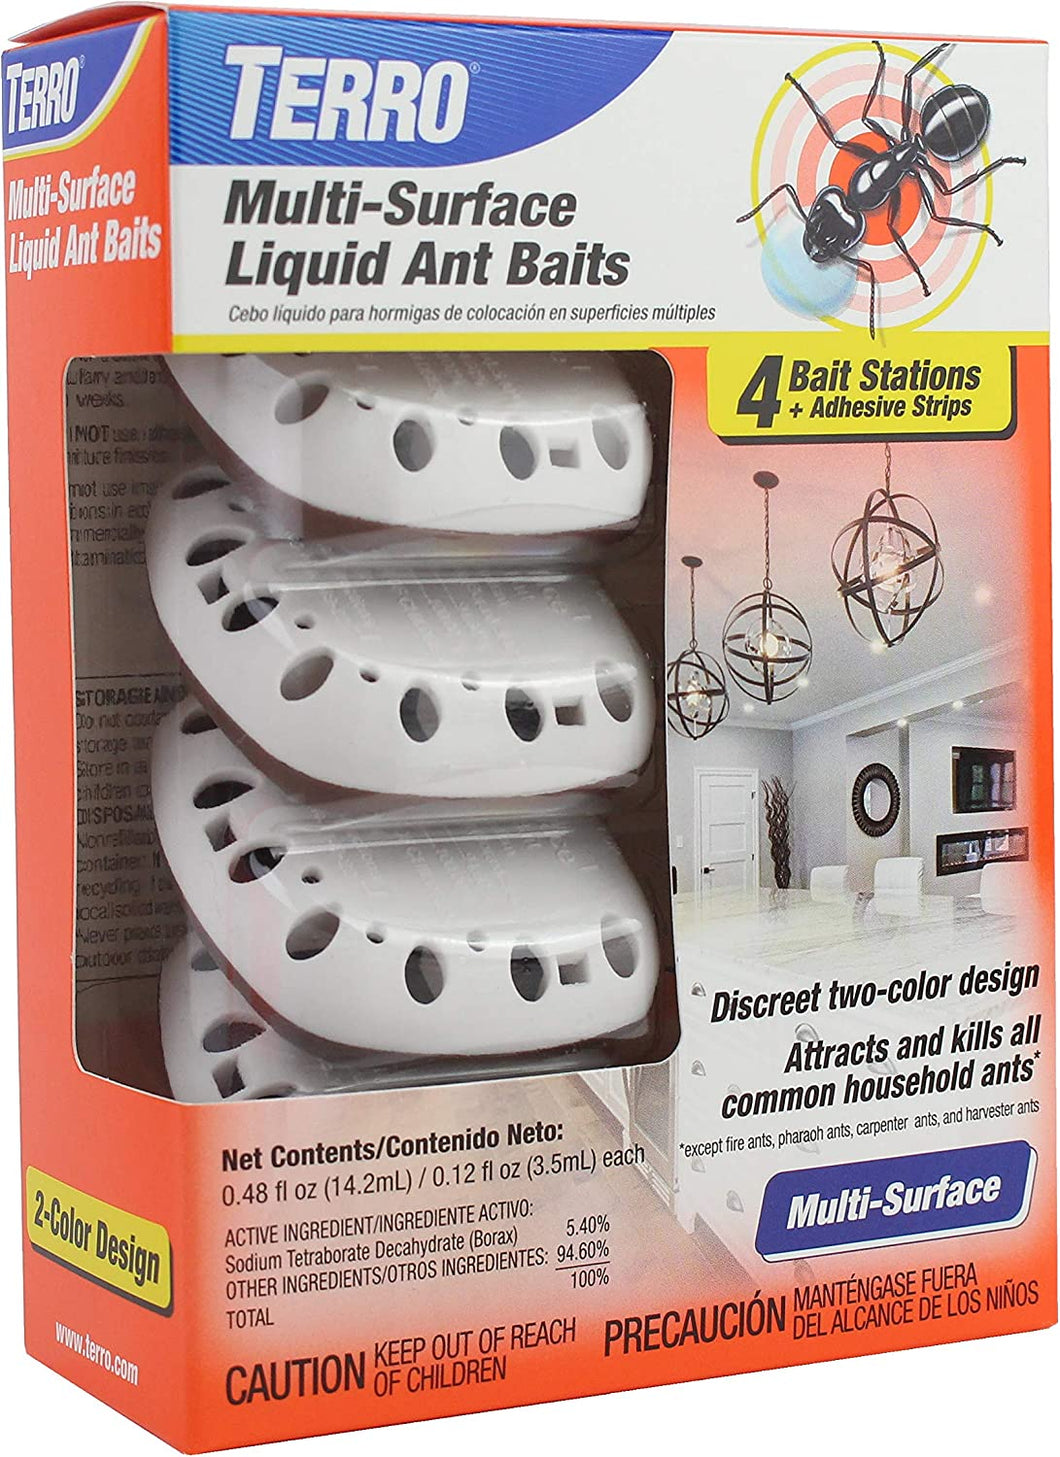 ITEM# 0184   Indoor Multi-Surface Liquid Ant Bait and Ant Killer - Kills Common Household Ants (Watch Video)